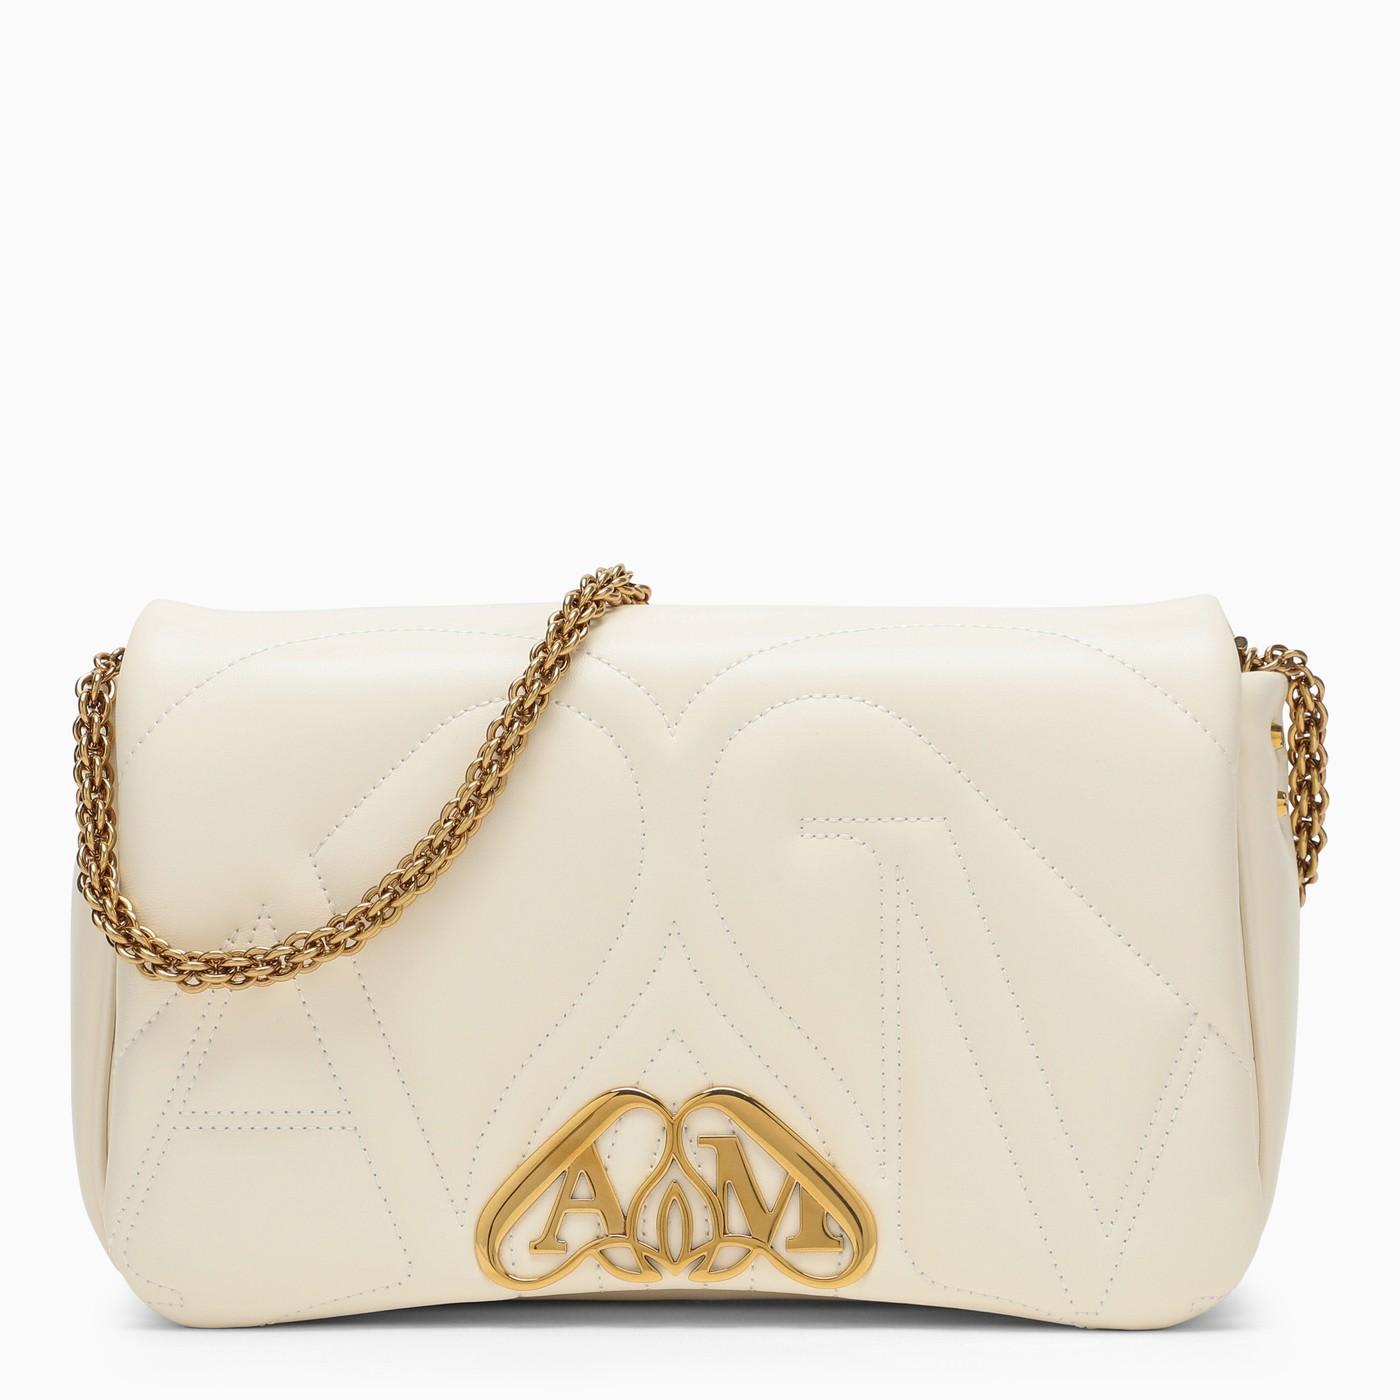 Seal Small Ivory Leather Bag